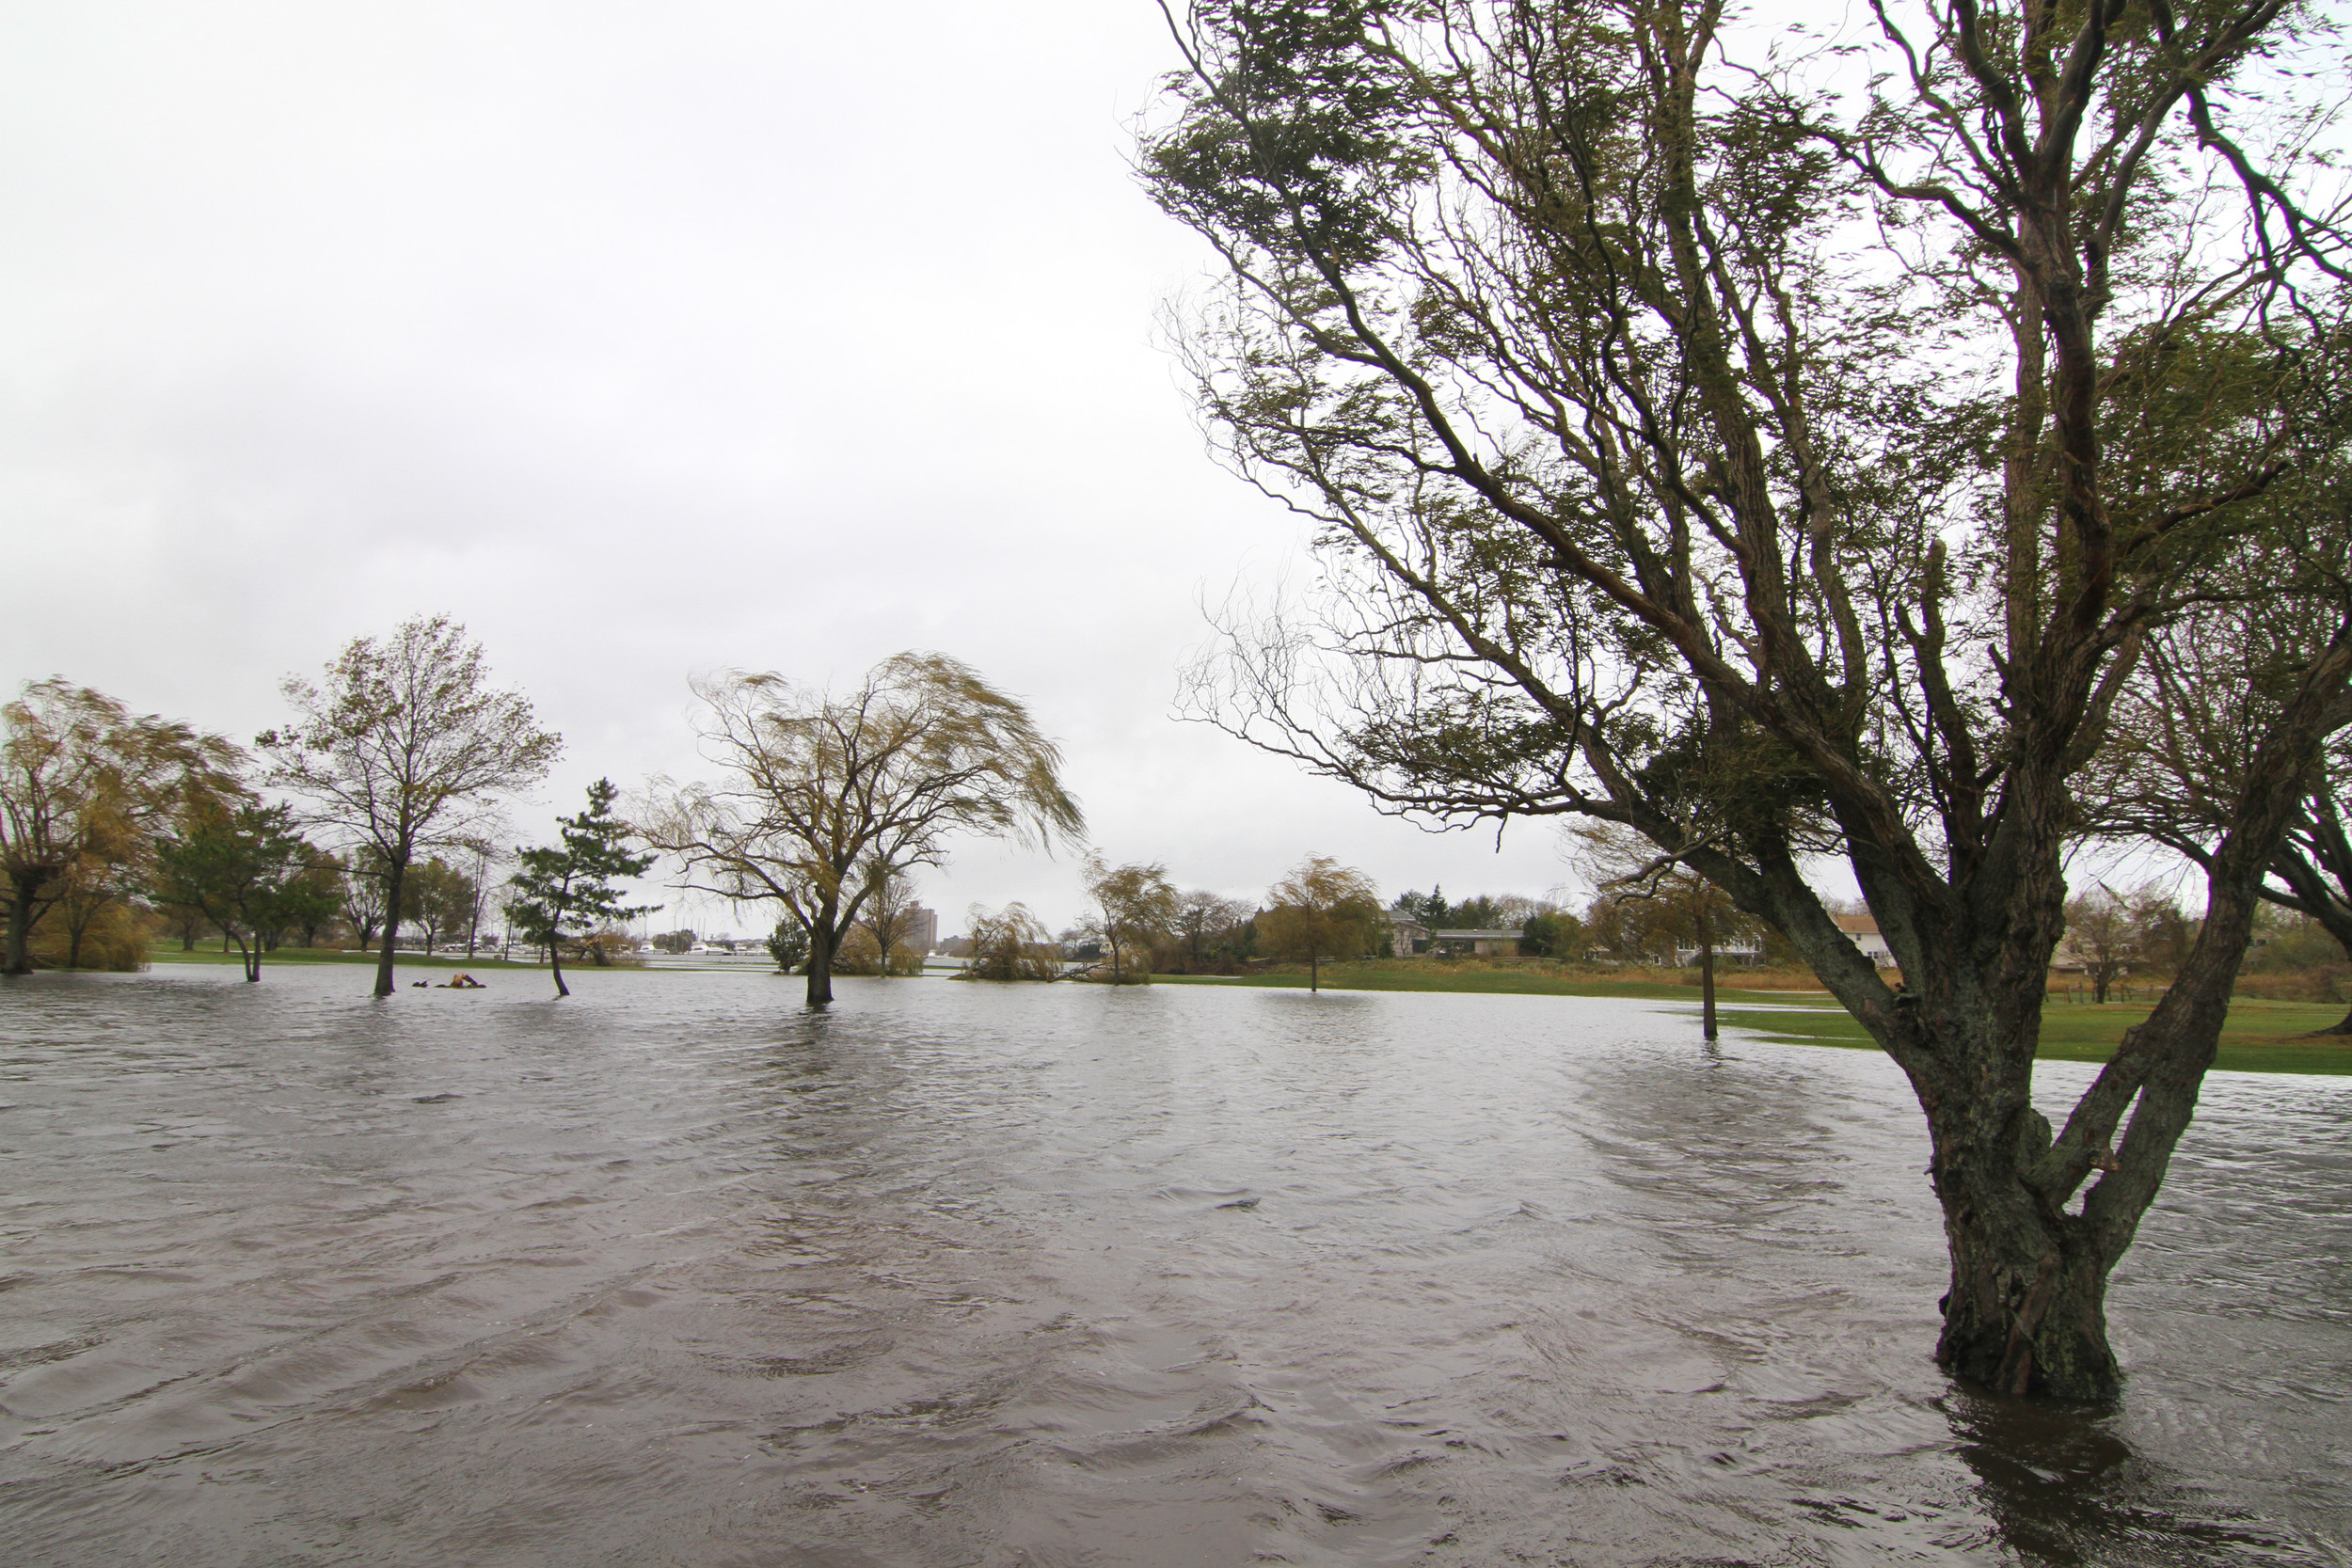 After Hurricane Sandy, the Lawrence Yacht & Country Club property was submerged.